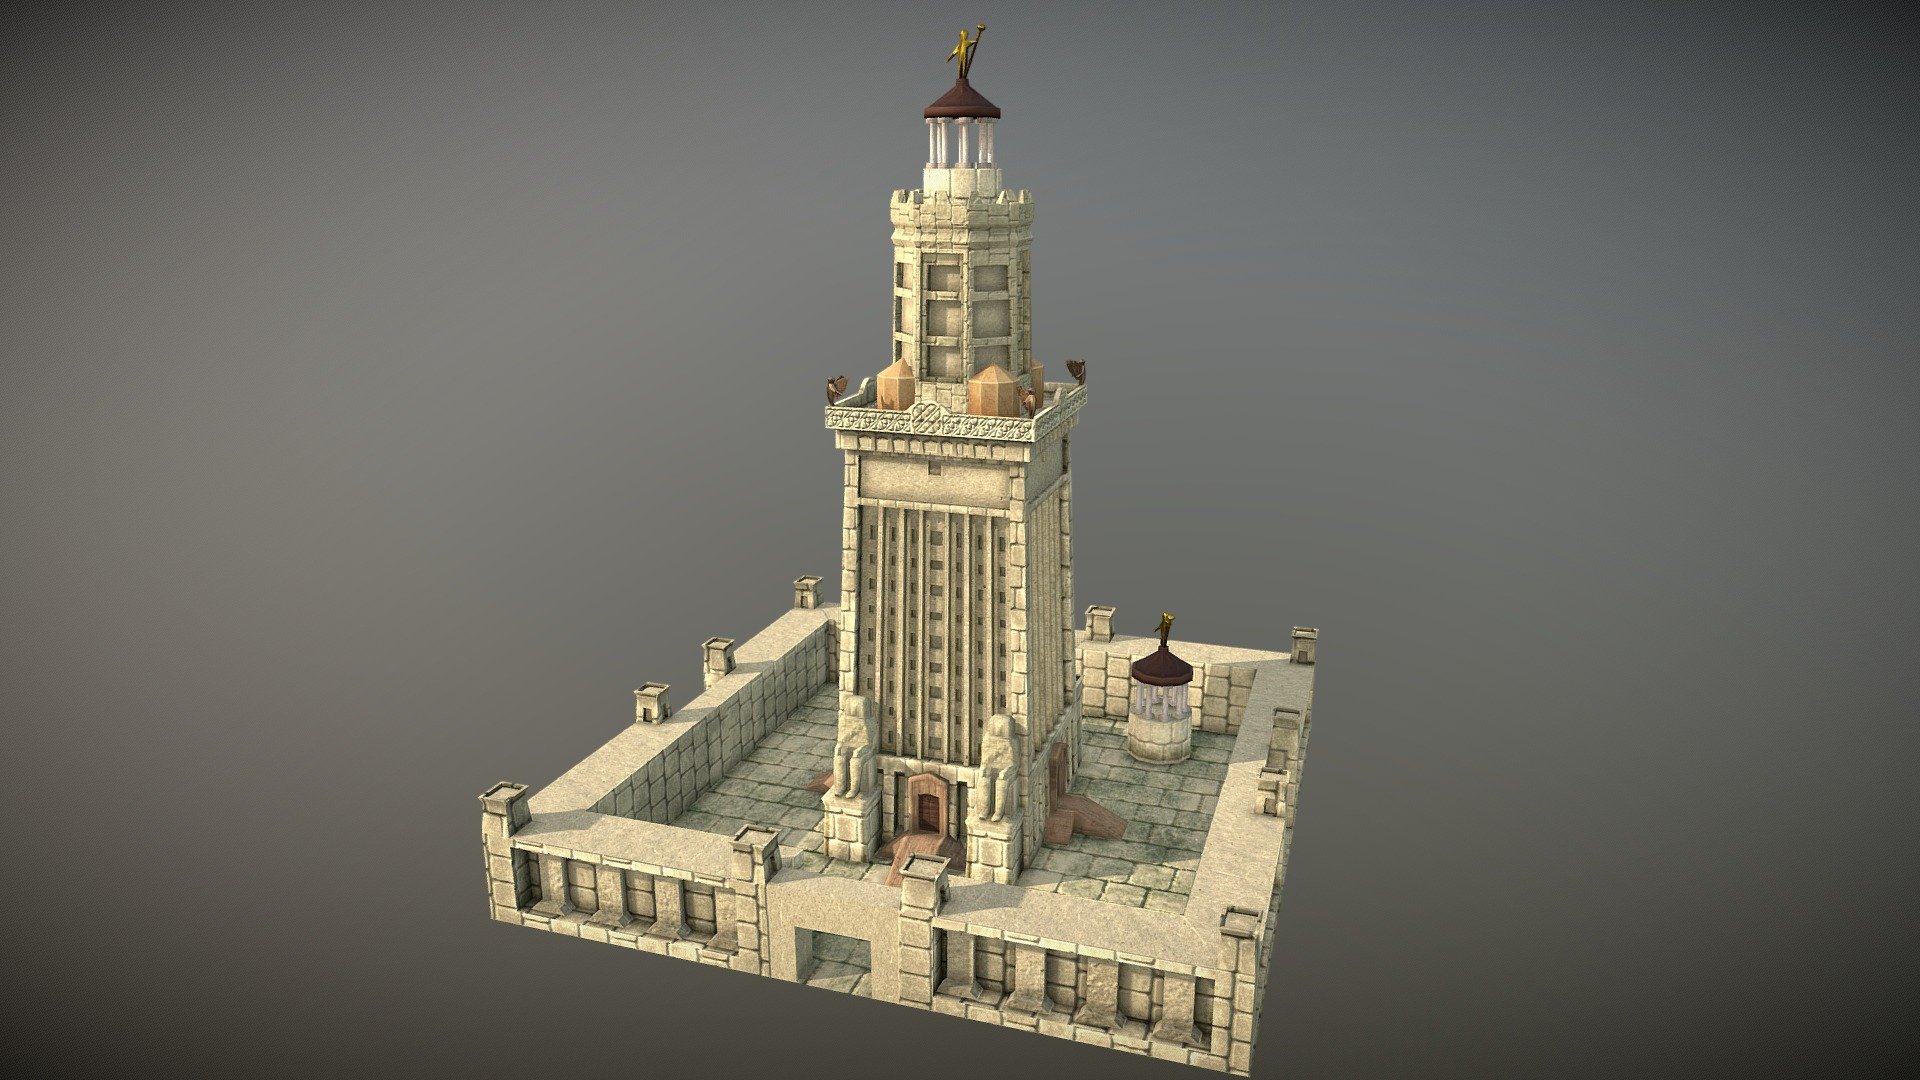 Texturized by me @xeep

Modeling by @jacobomuino

Made for BOC Project - Lighthouse of Alexandria - 3D model by Xeep 3d model